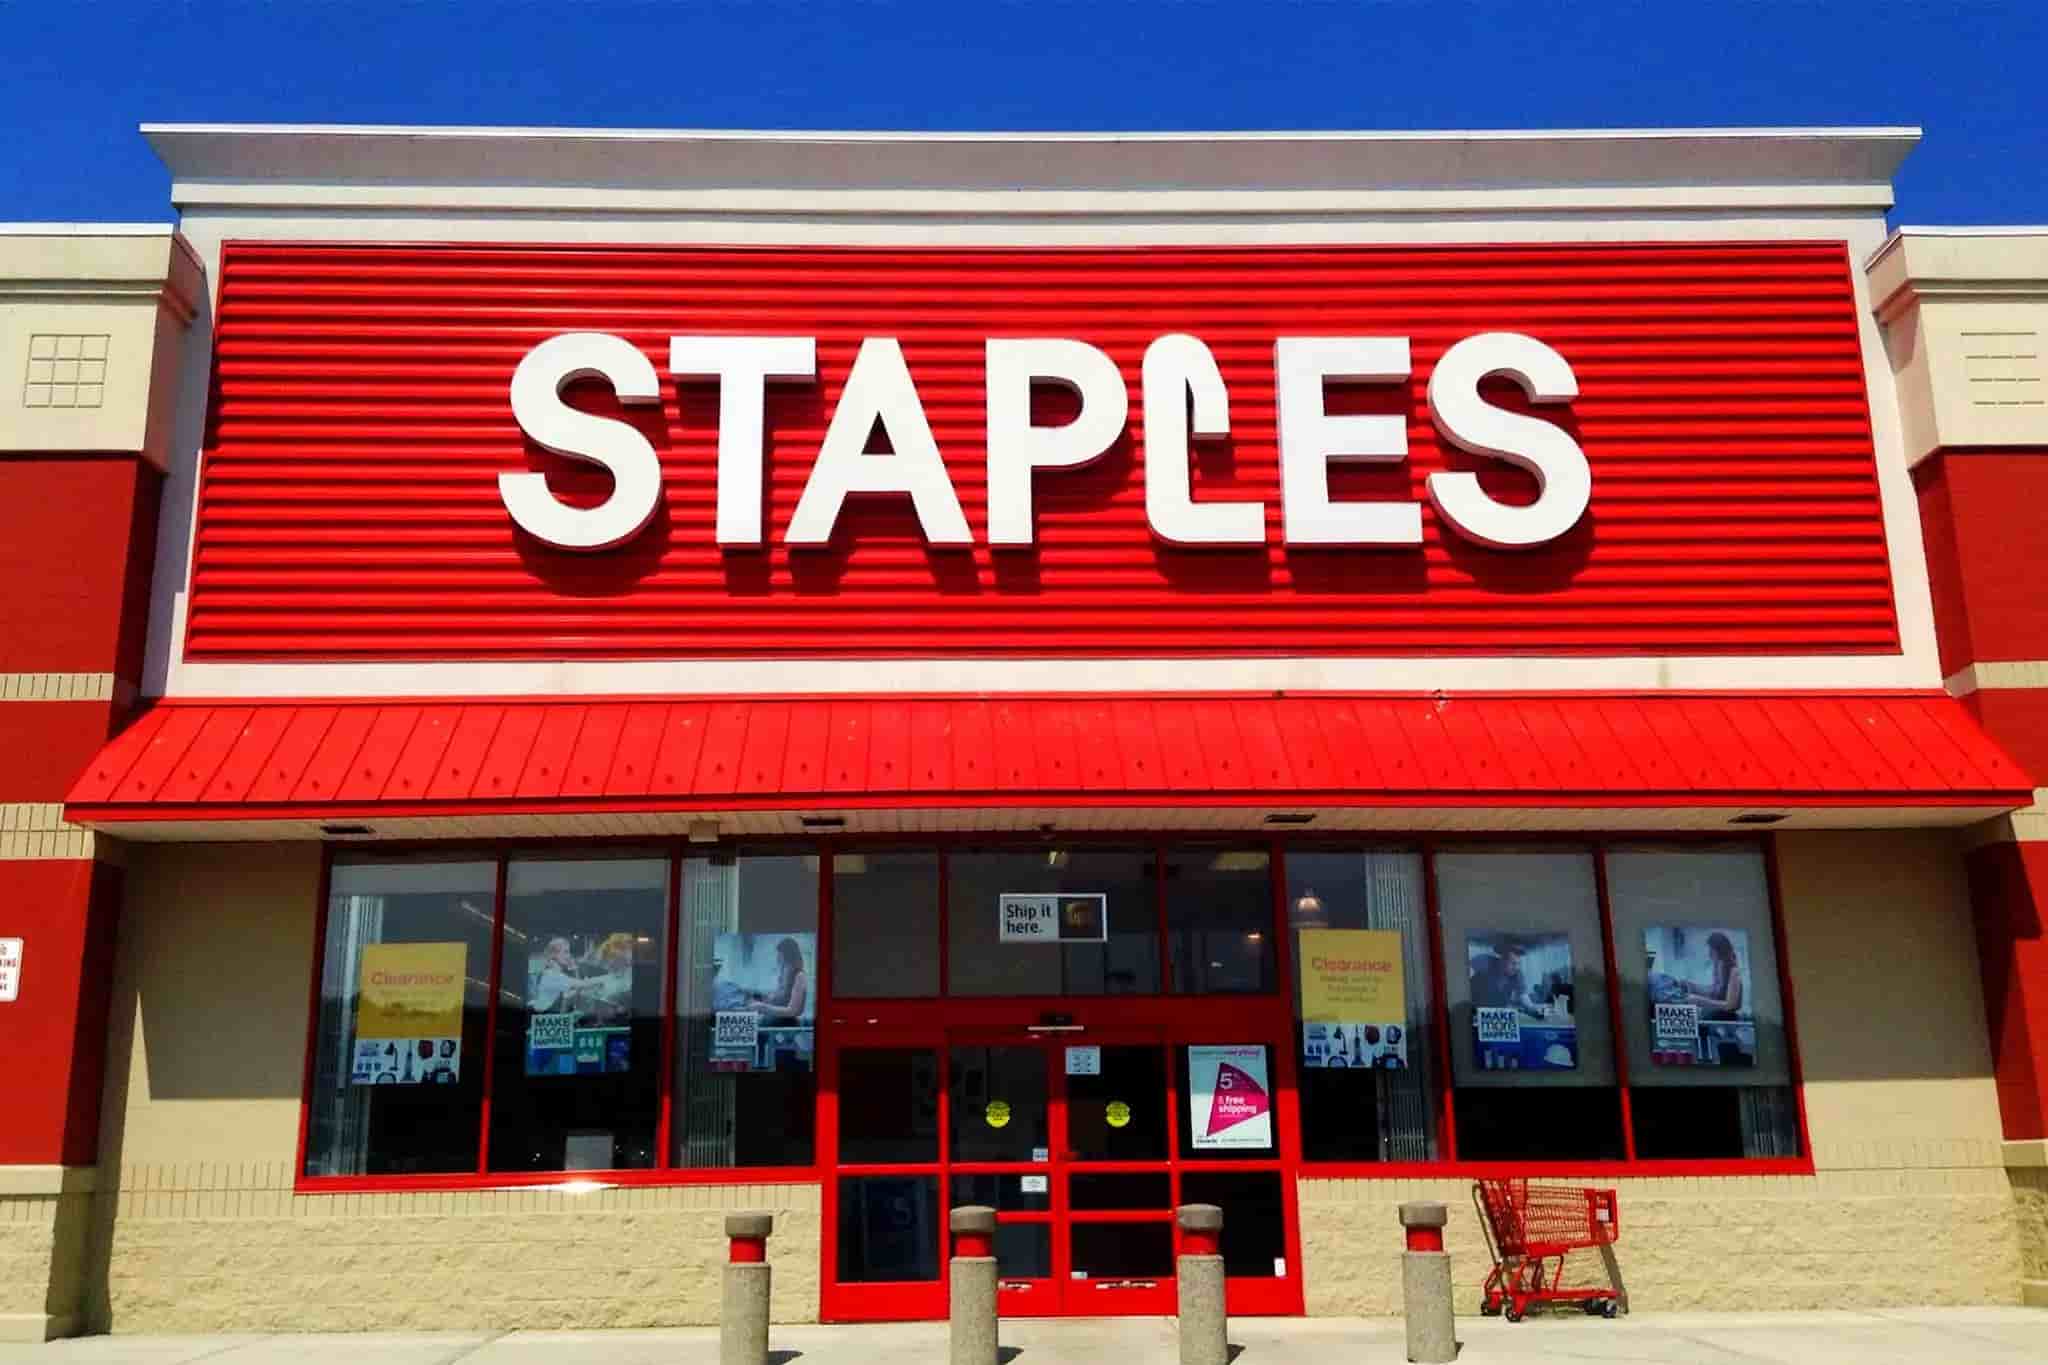 staples outlets, staples in-store - staples coupon code 25 off $75